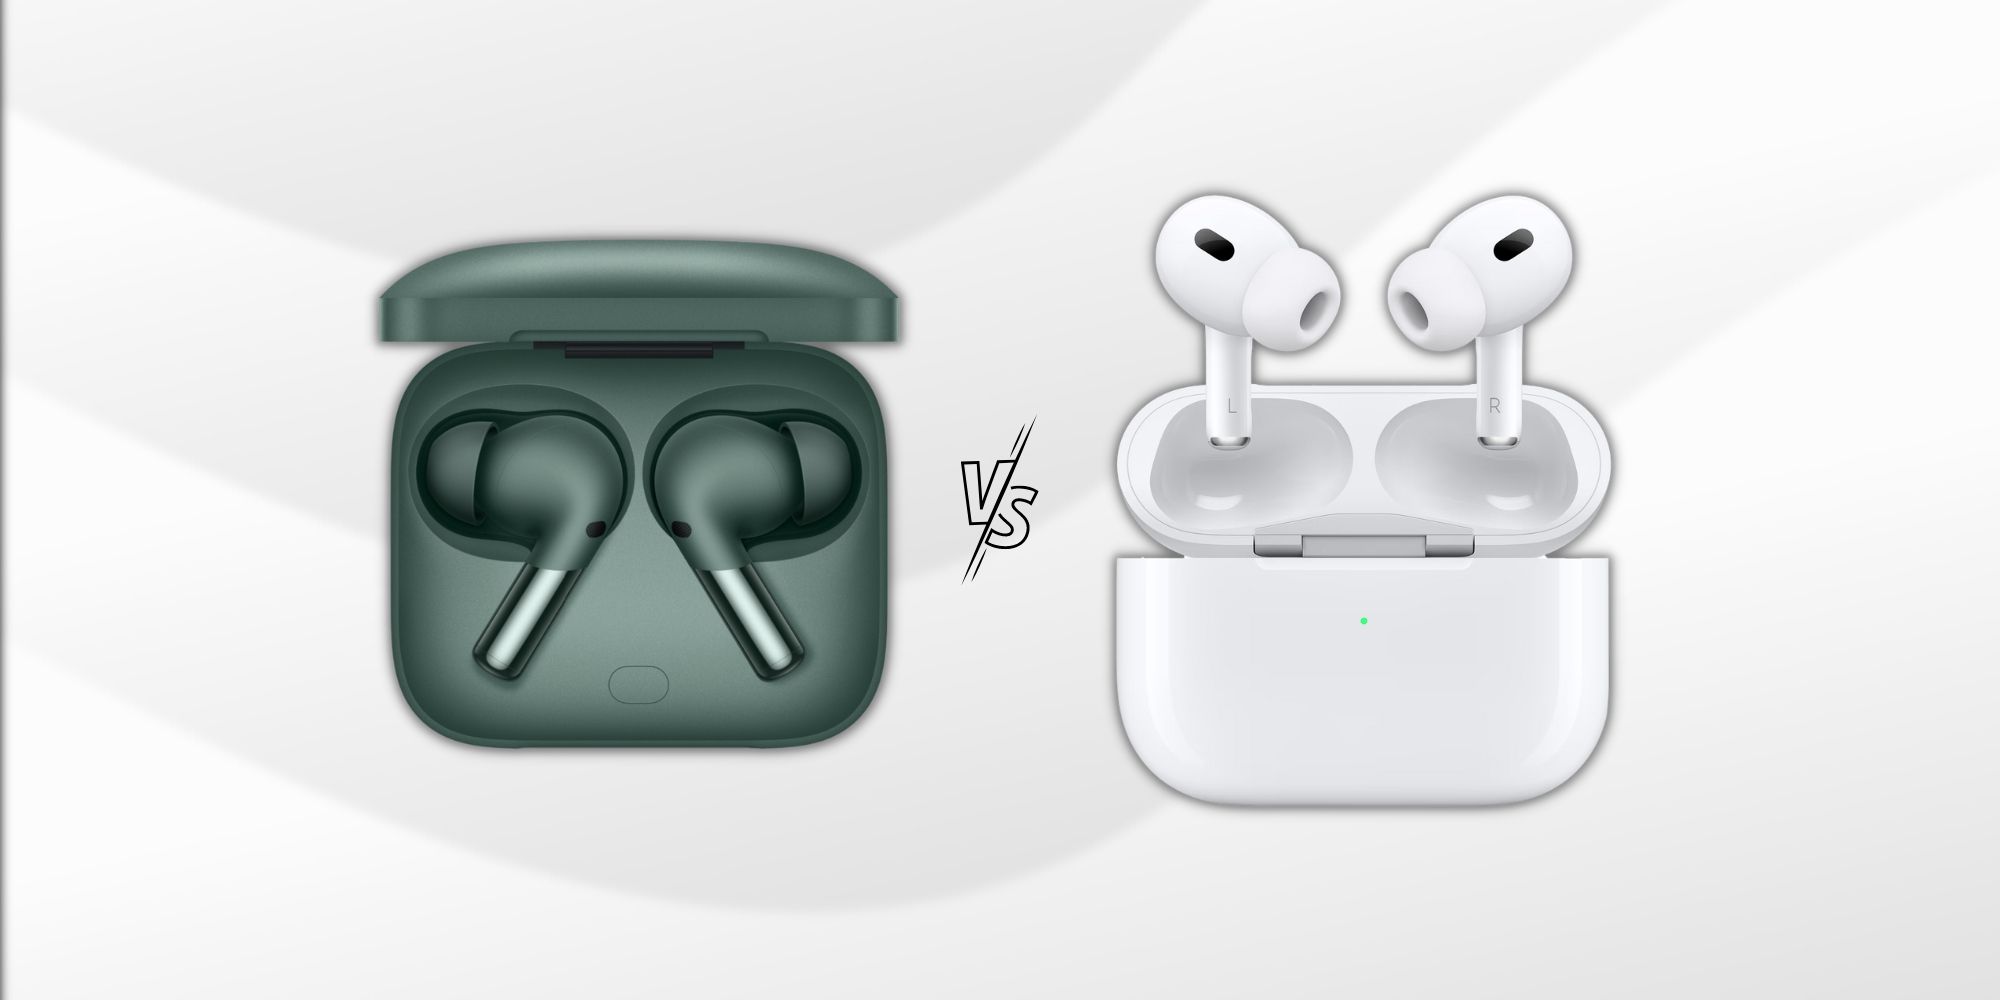 Image of the OnePlus Buds Pro 2 in green color and AirPods Pro 2 in white color over a gray background